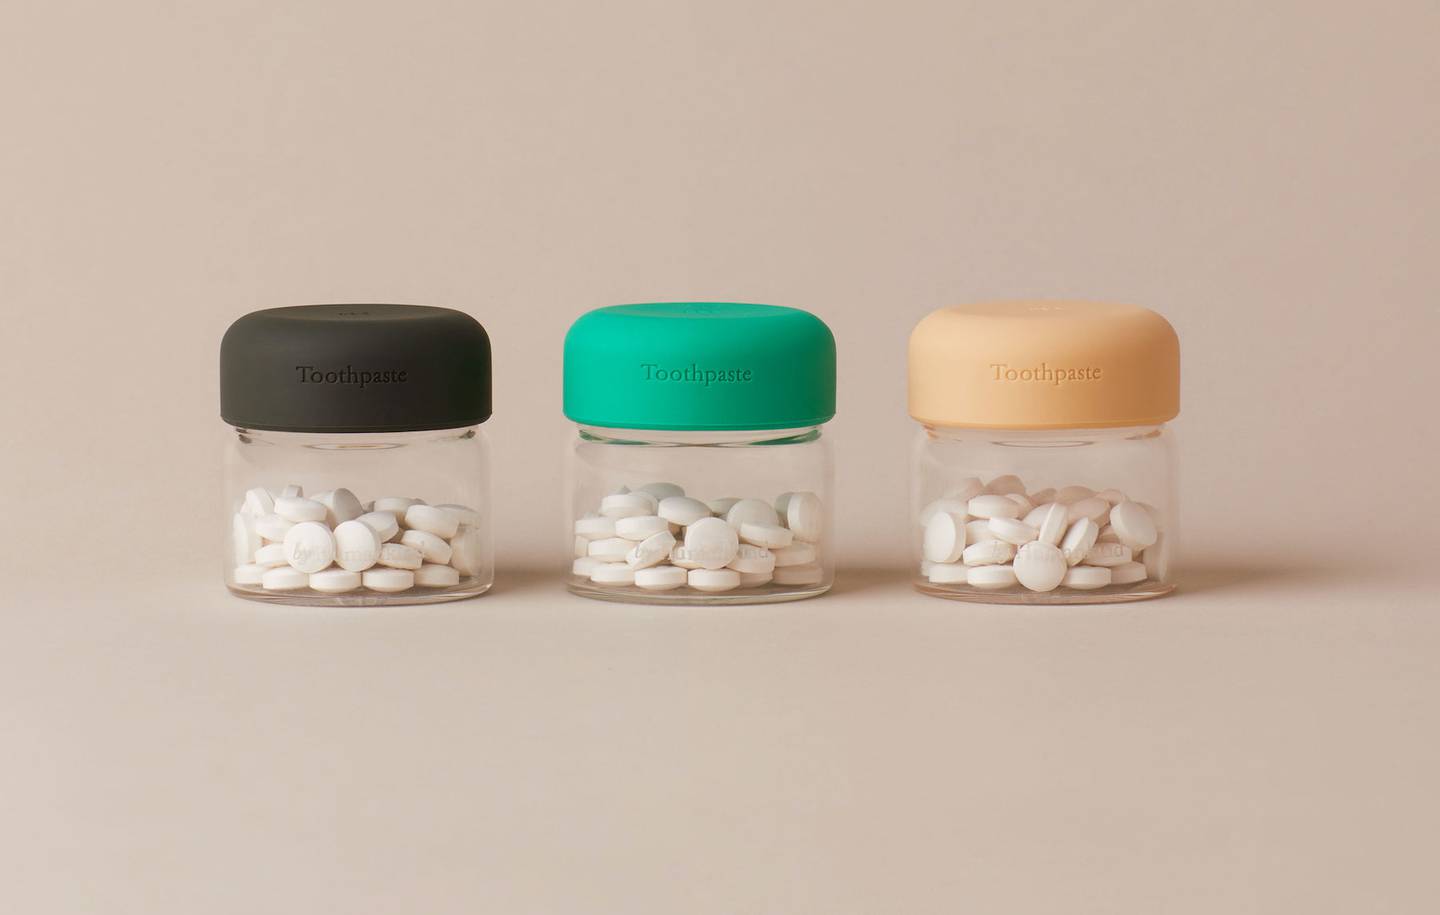 Toothpaste from the startup By Humankind comes in tablet form, and with reusable jars.